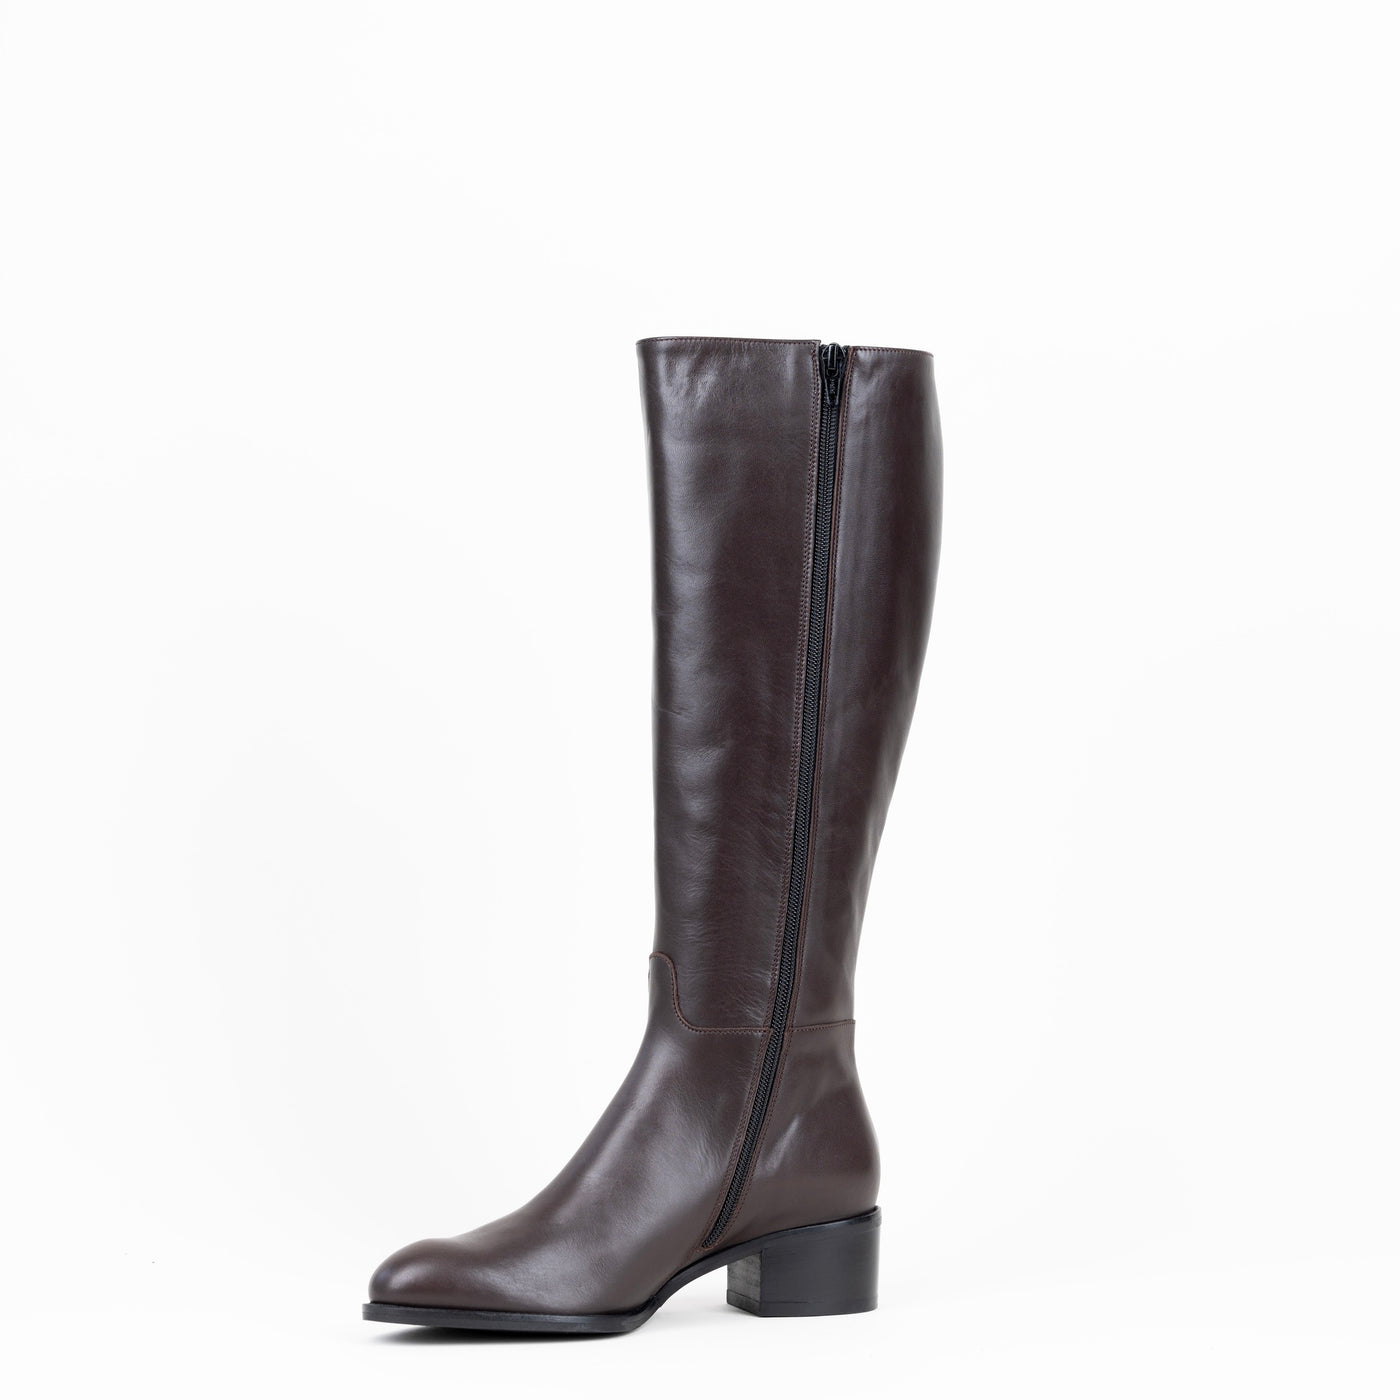 Women's classic brown leather boots with zipper on the inside.